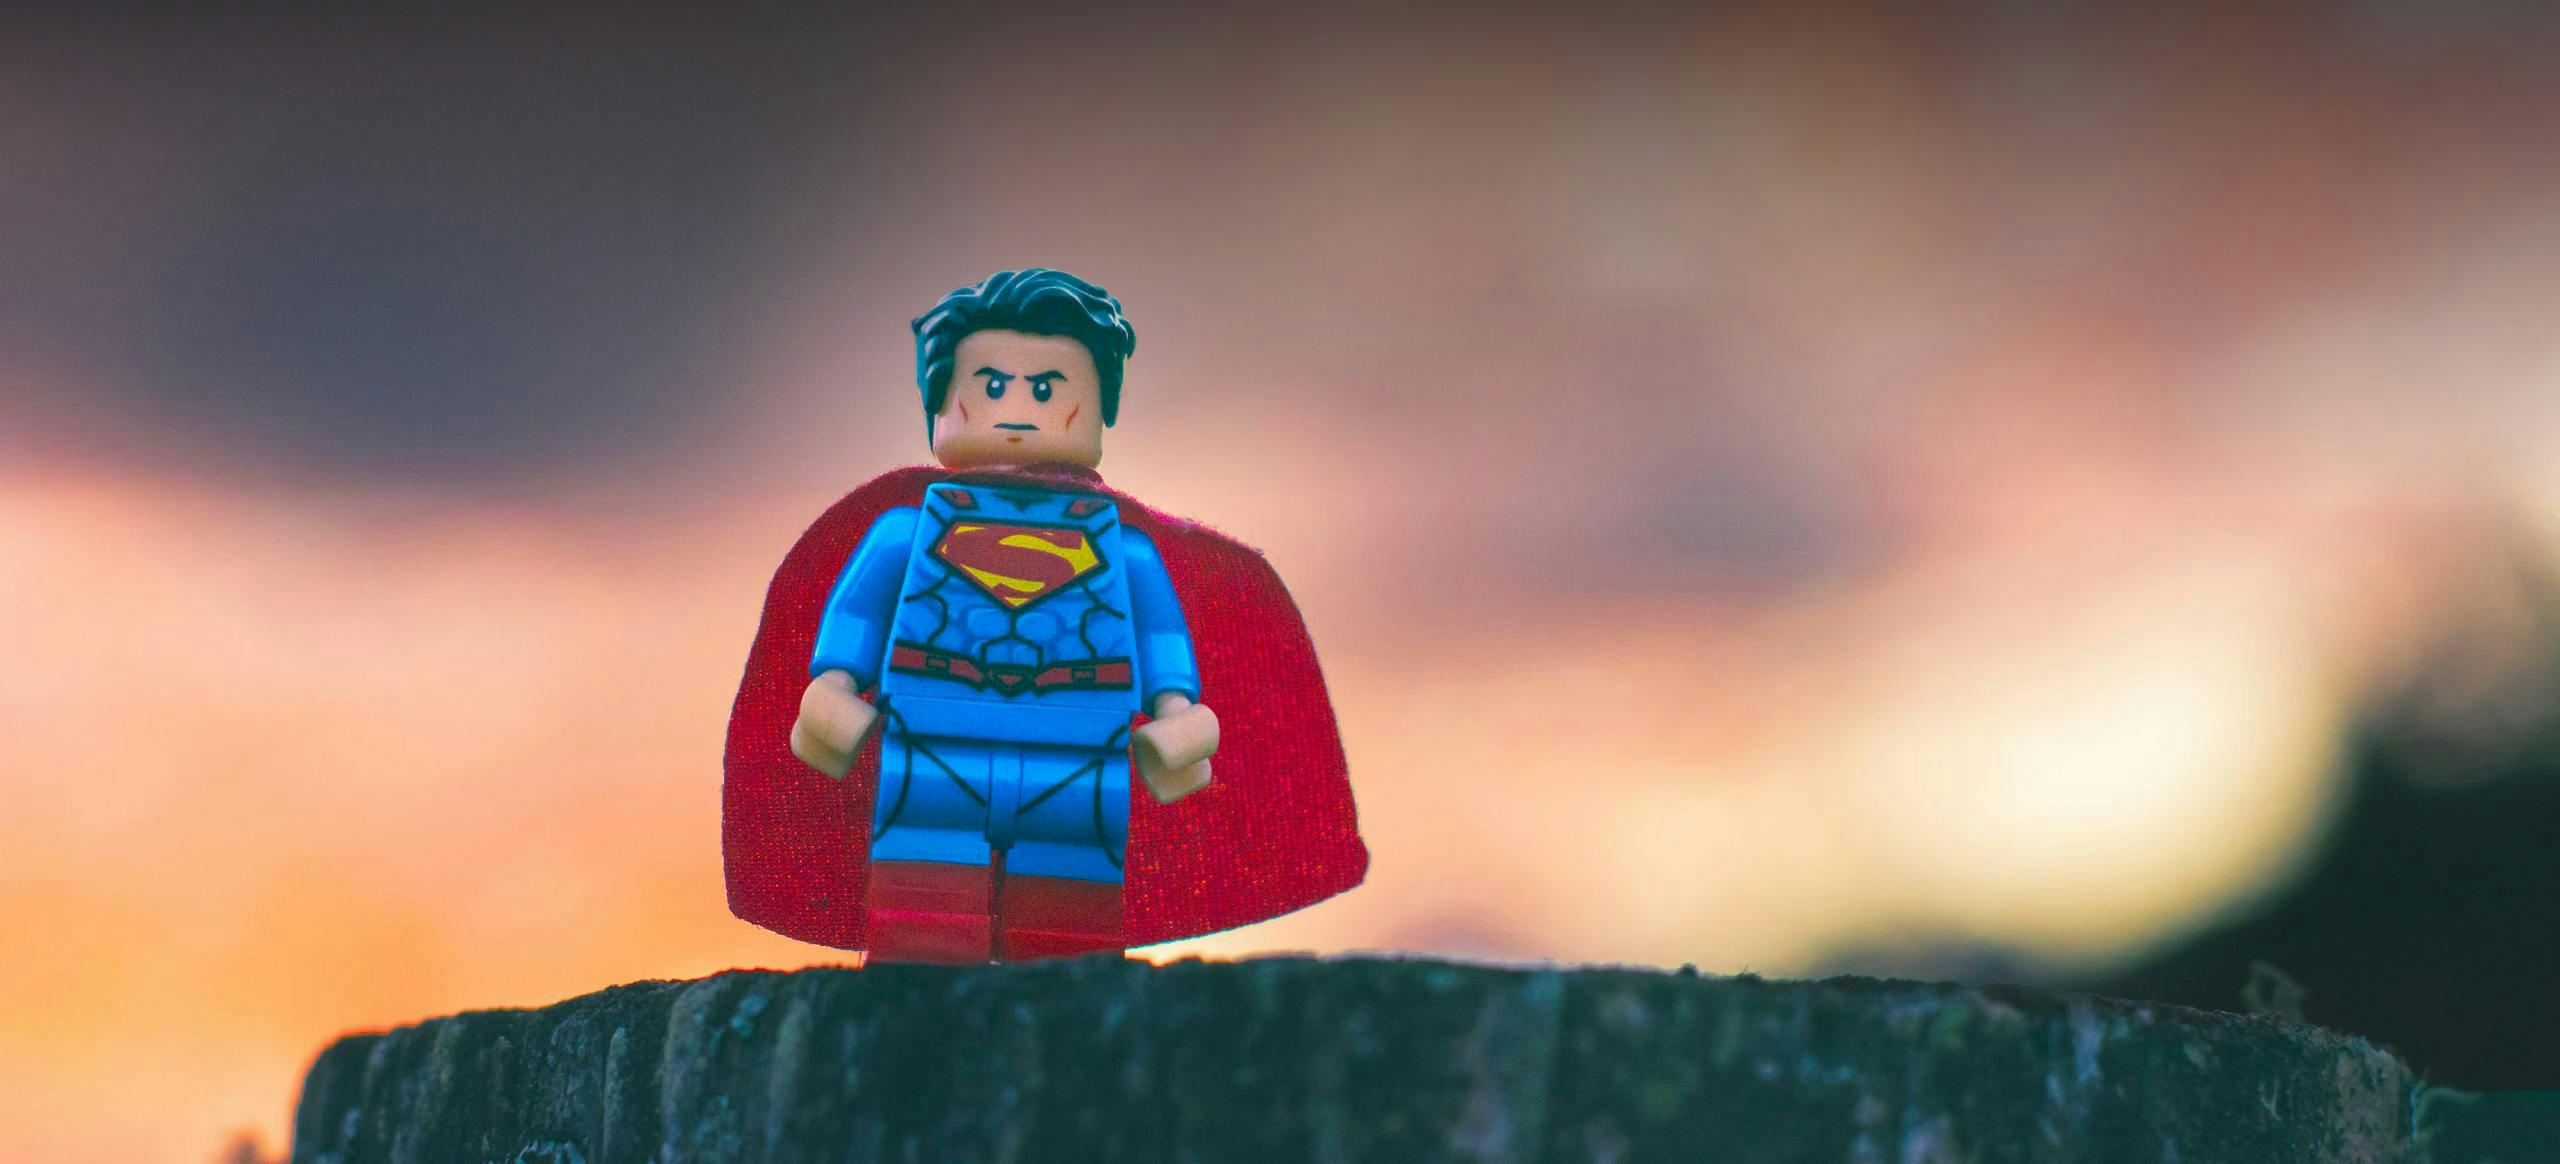 A lego superman figure standing on a rock